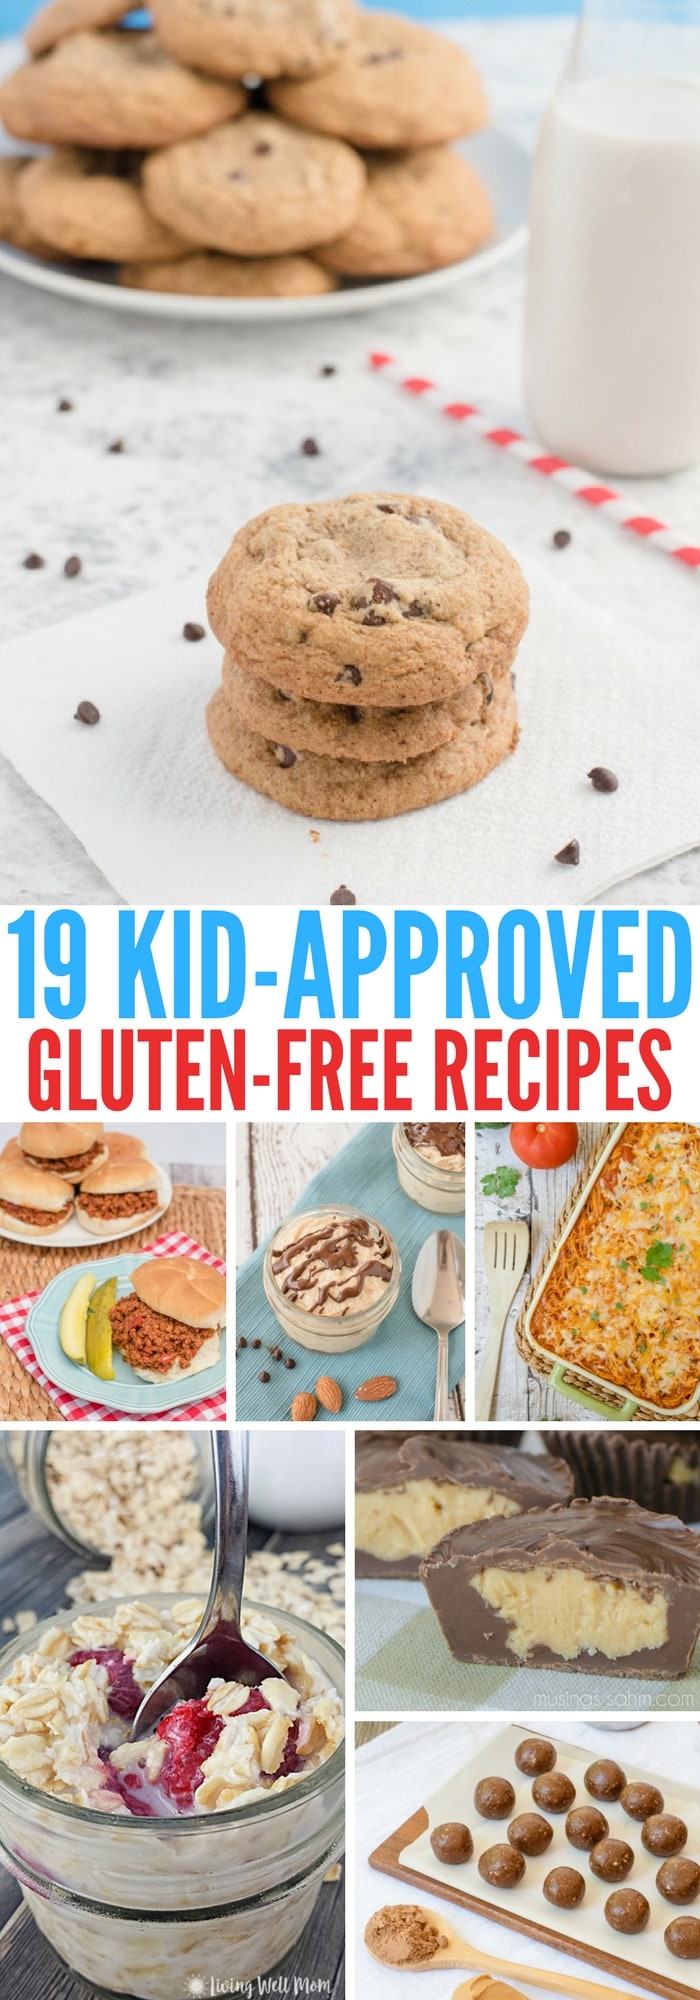 19 Kid-Approved Gluten-Free recipes - everything from breakfast to dinner, snacks to desserts, here’s a fun list of foods kids love!